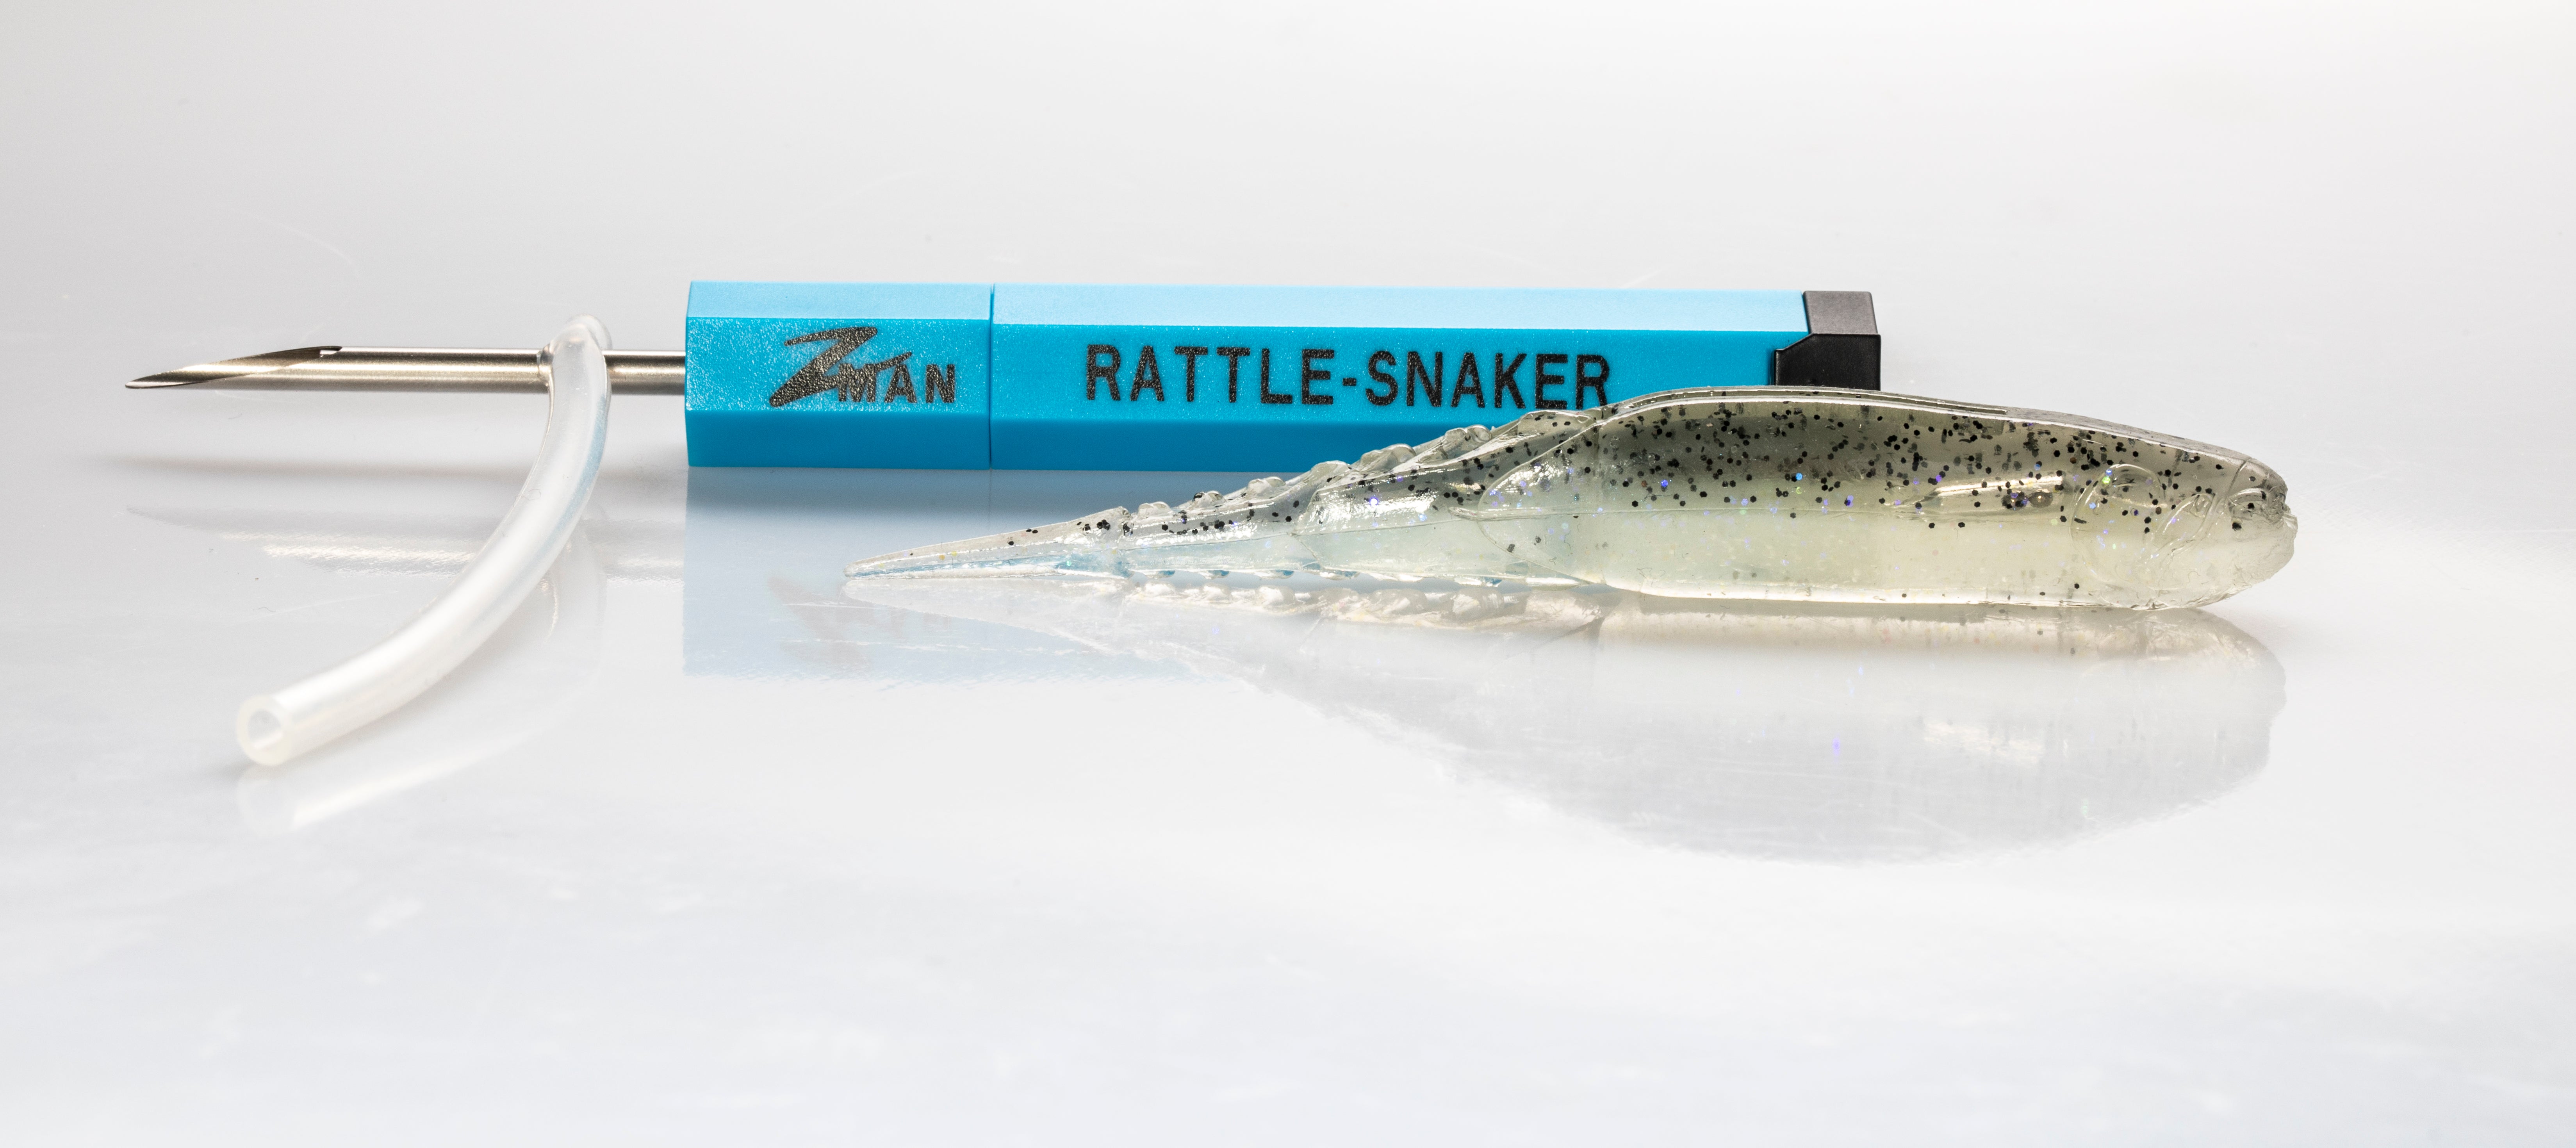 Rattle snaker with chatterspike bait